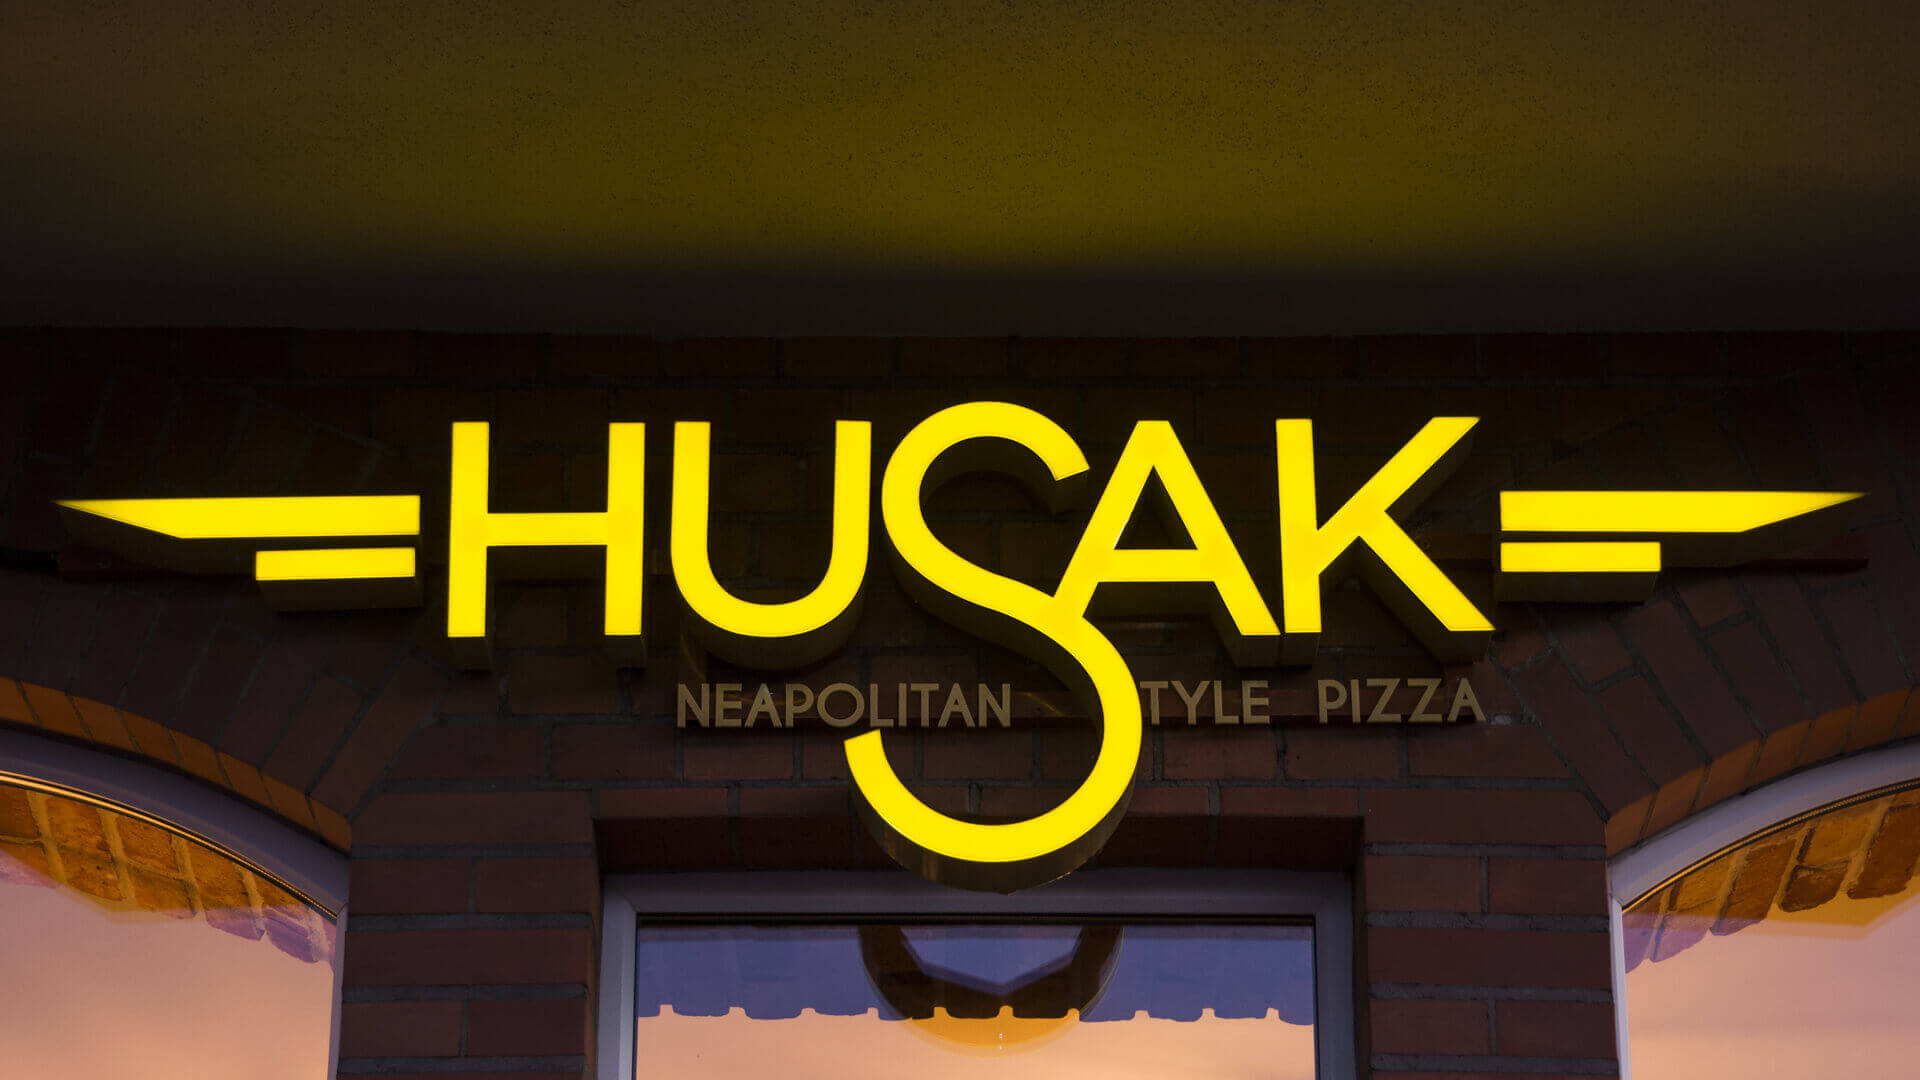 husak pizzeria - hussak-pizzeria-zlote-literature-spatial-illuminated-tile-letters-on-the-wall-with-cartridge-over-the-inlet-over-the-wall-sign-mounted-to-the-wall-grunwaldzka-gdansk (14)